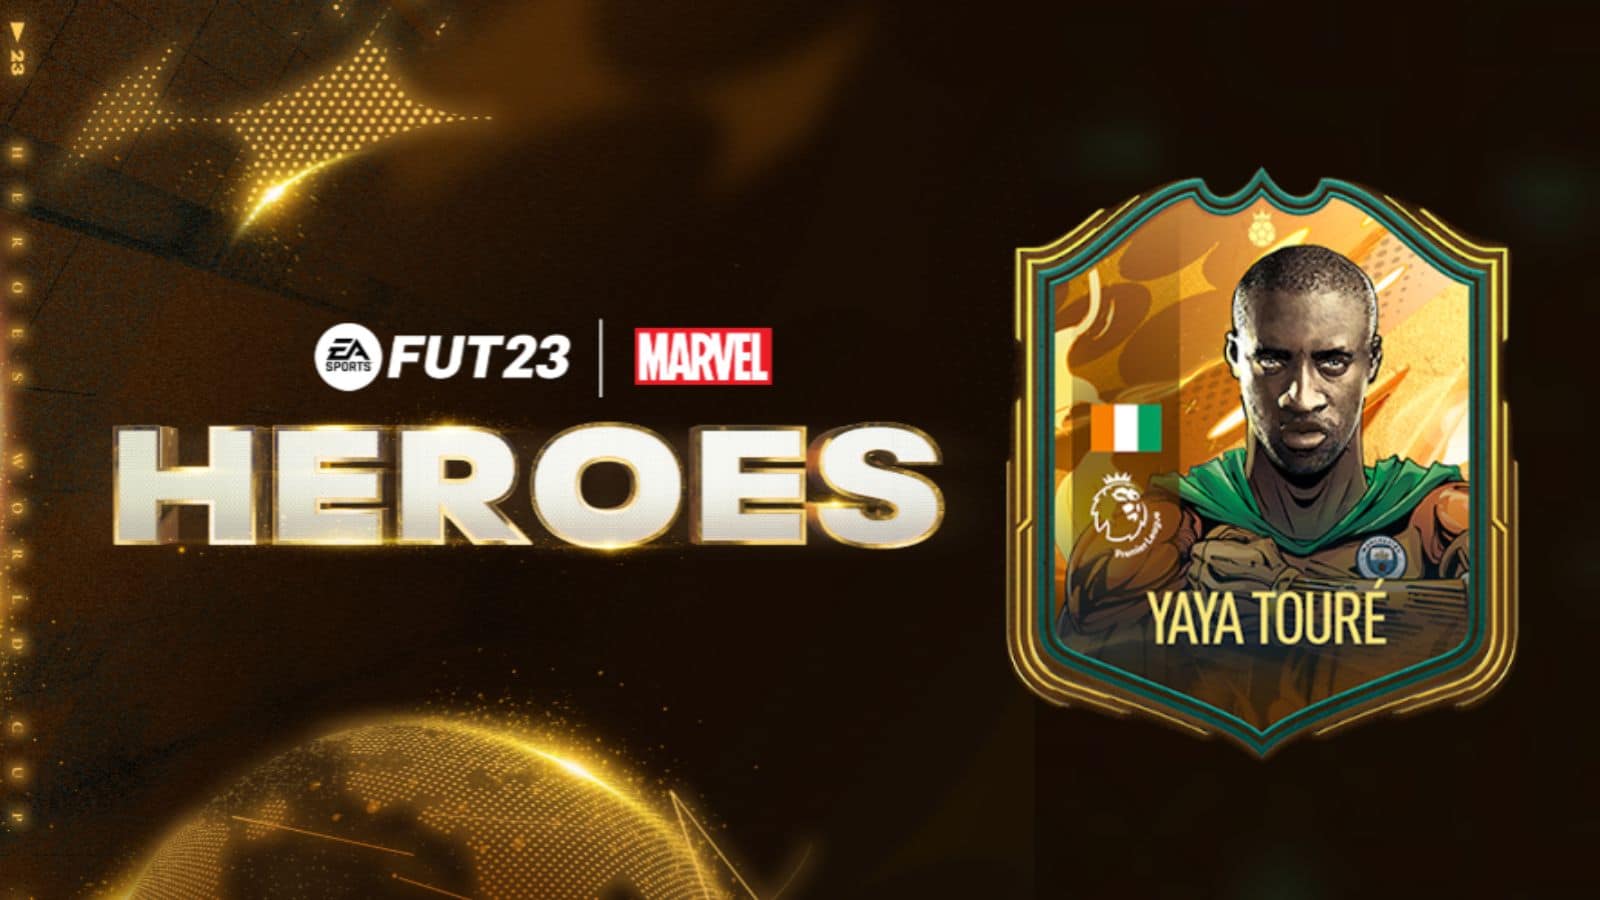 How to get free FIFA 23 Marvel Super Heroes card in Ultimate Team